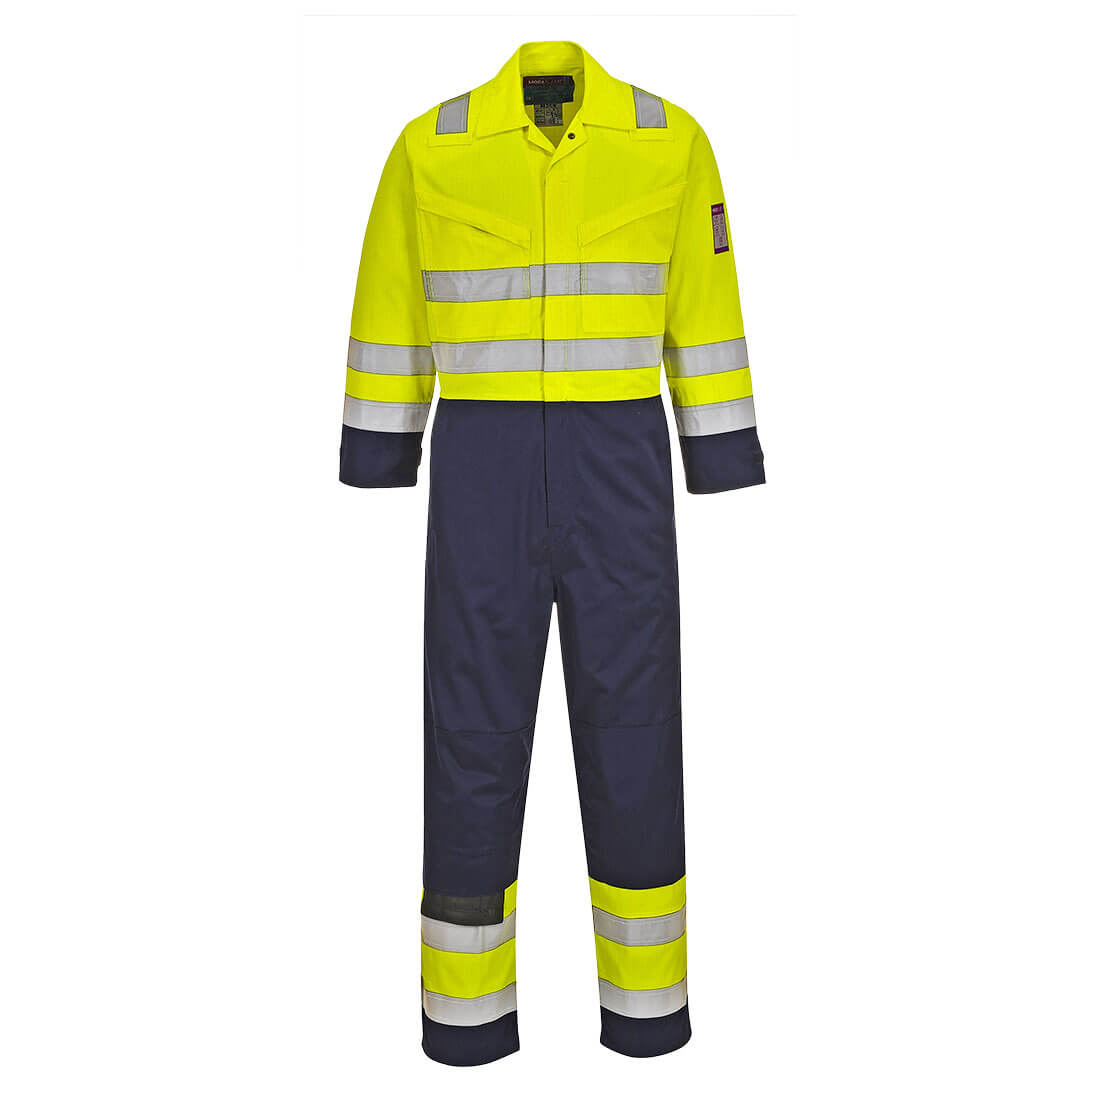 Image of Modaflame Flame Resistant Hi Vis Overall Yellow / Navy Medium 34"